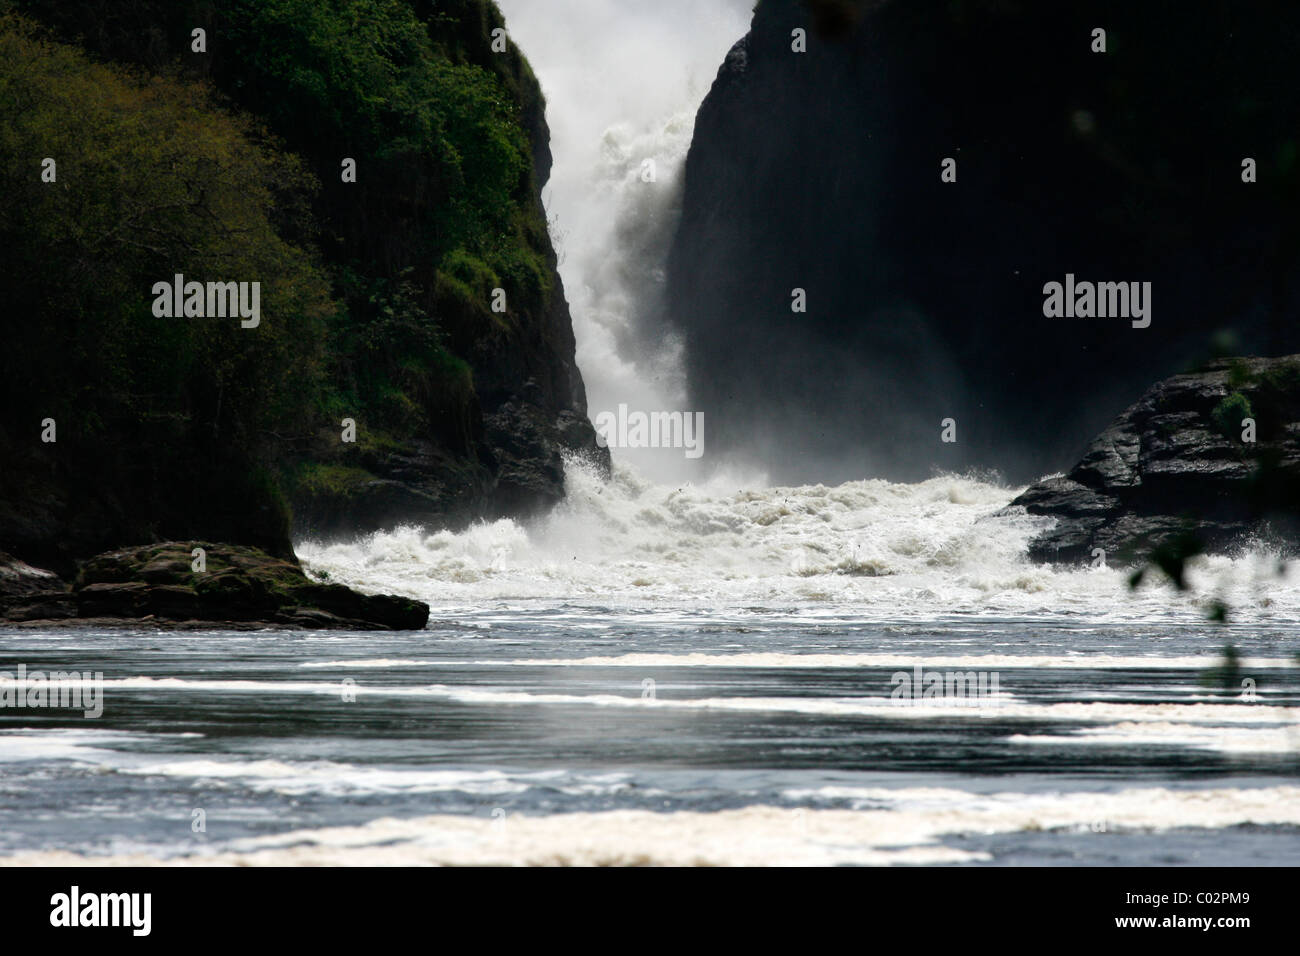 Murchison Falls, where the White Nile is forced through a 7 meter gap, Uganda Stock Photo